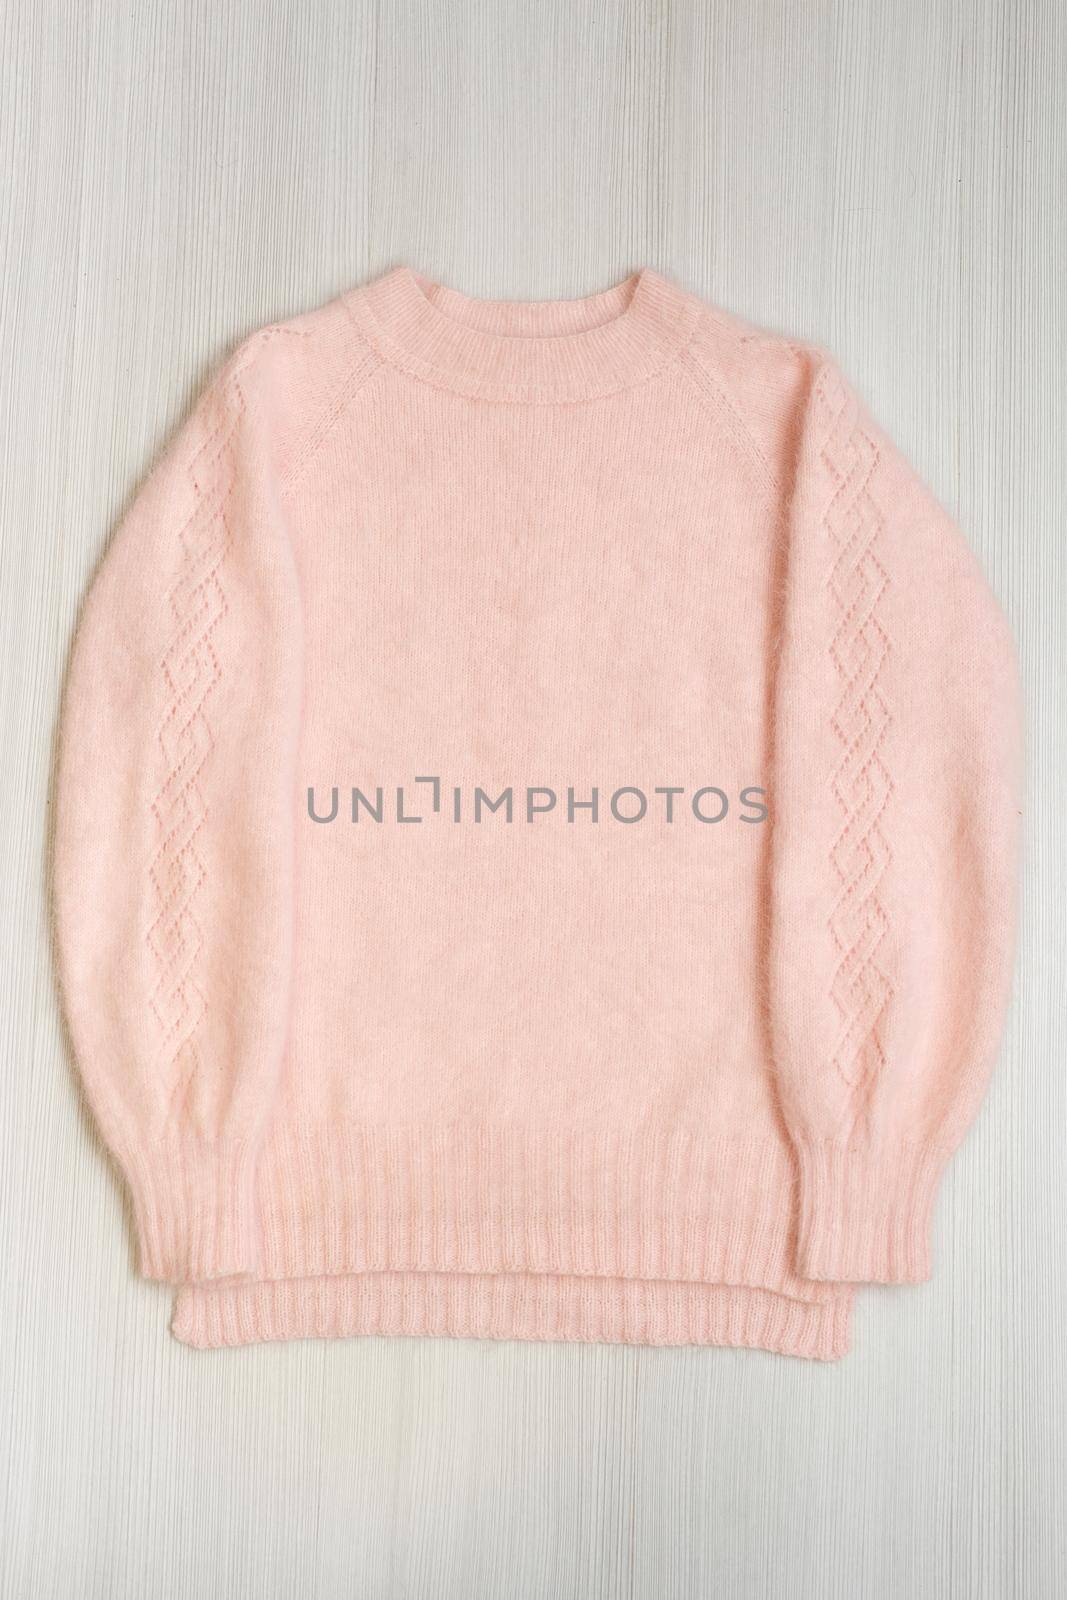 Knitted women's sweater on a white background